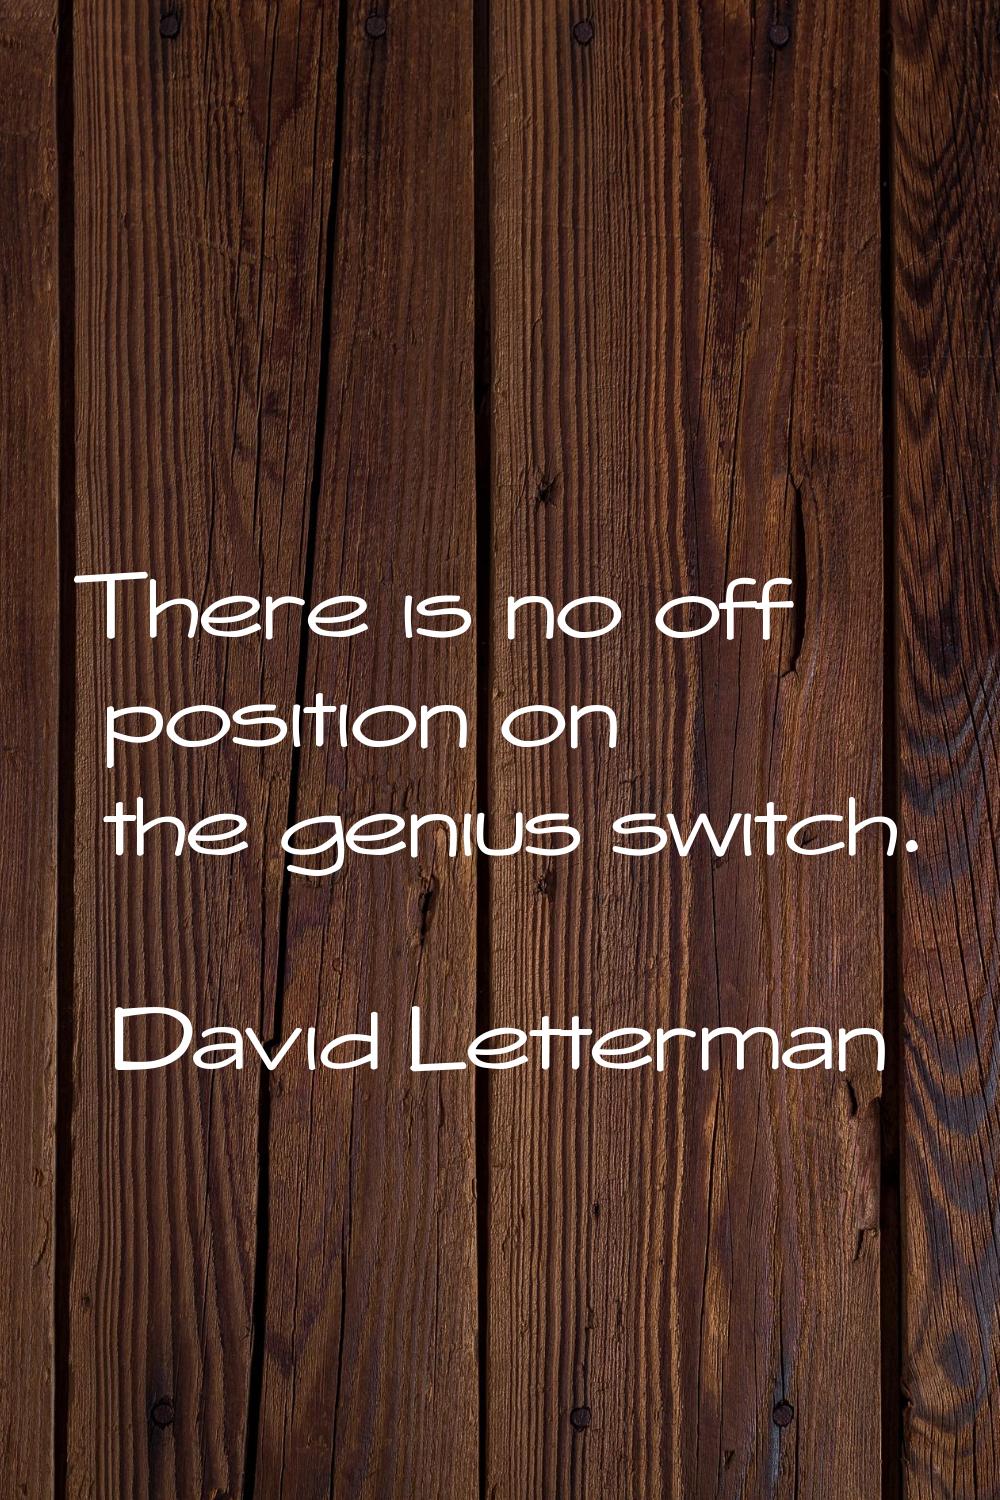 There is no off position on the genius switch.